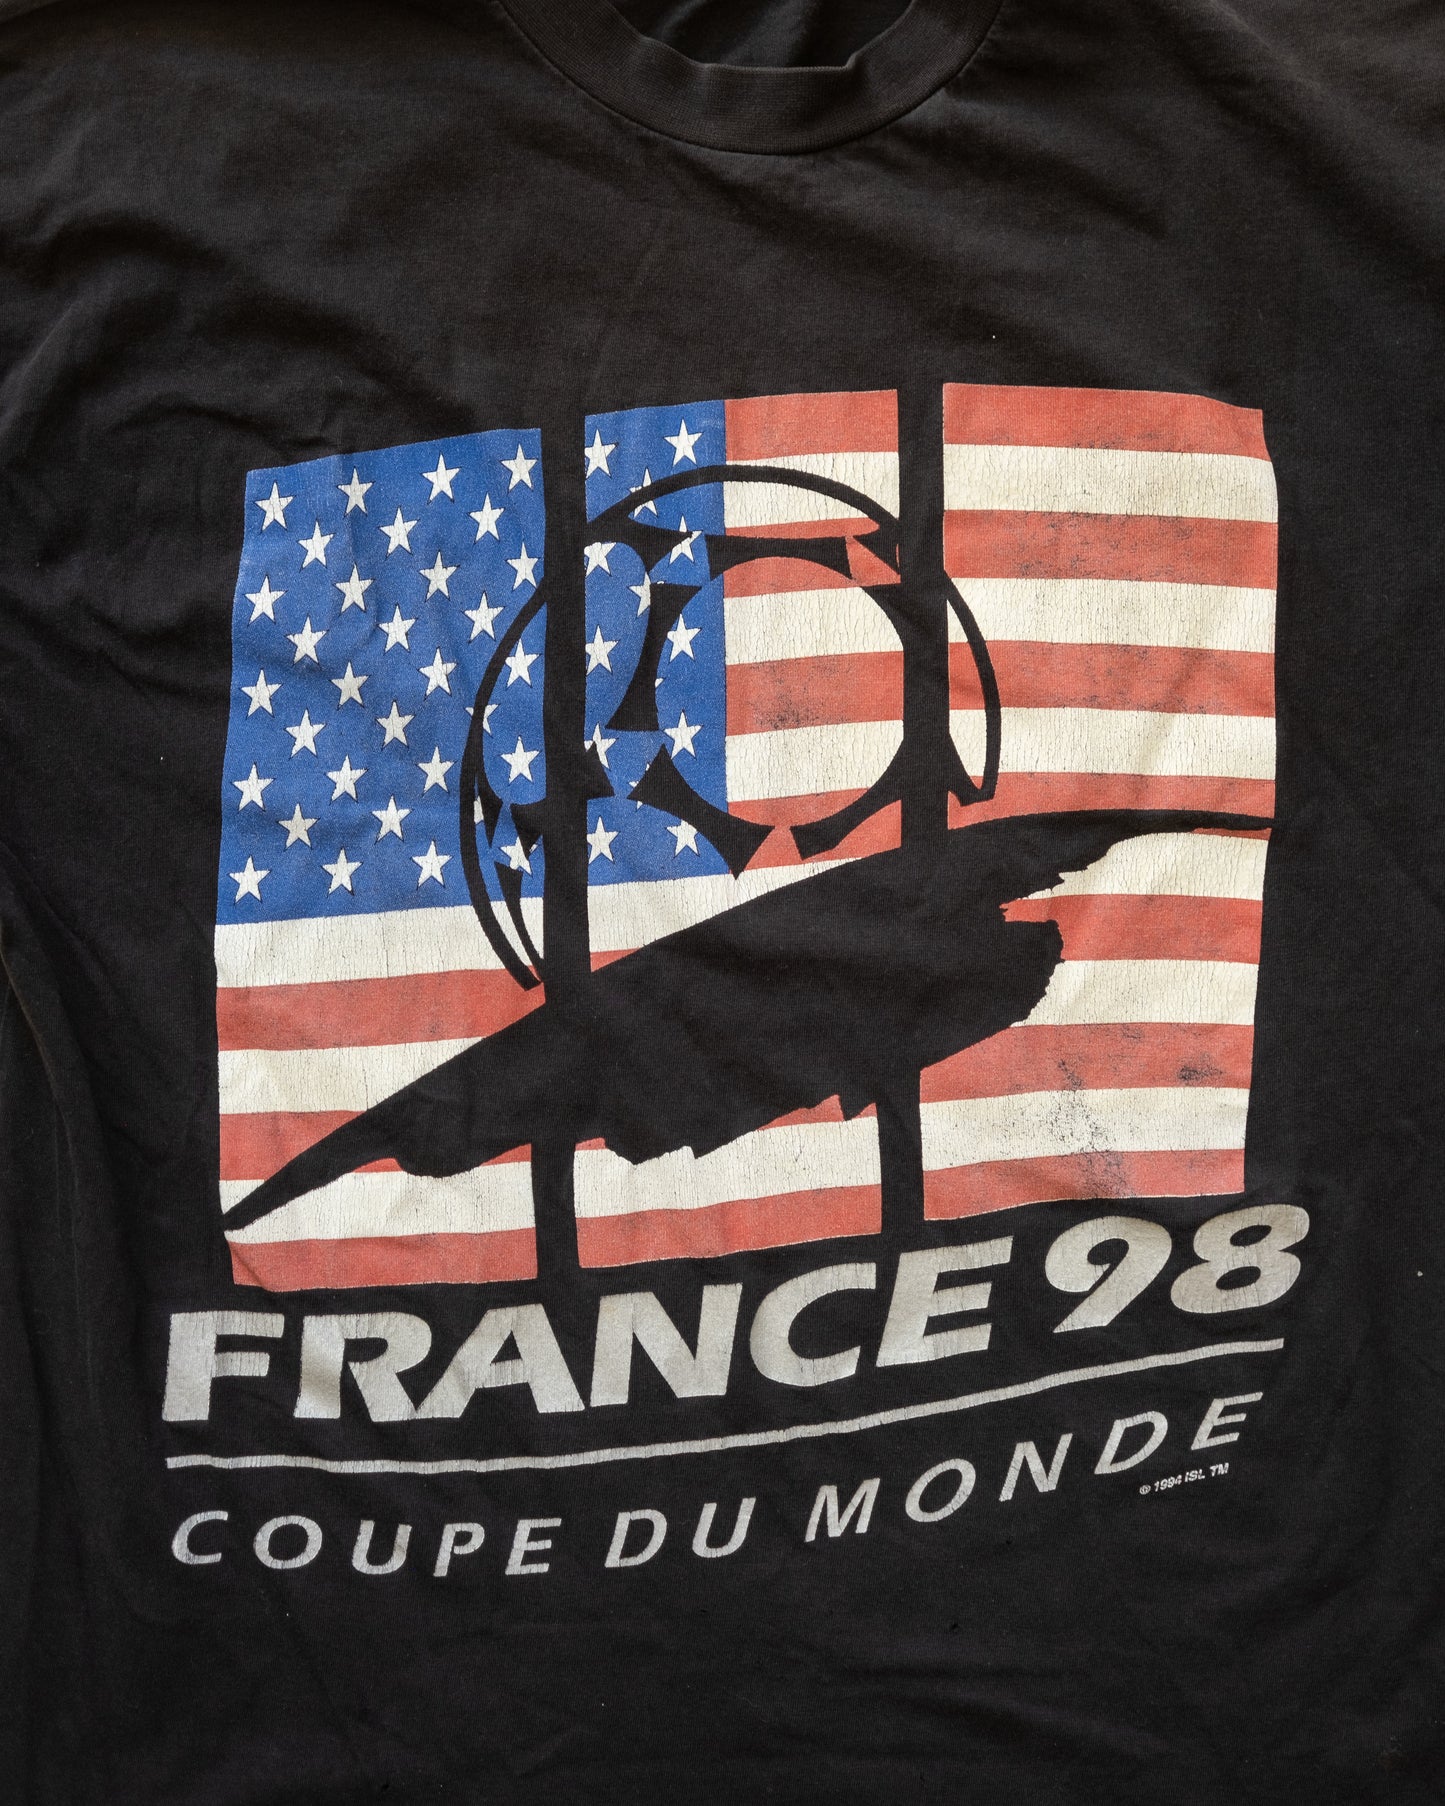 Adidas France 98 World Cup Vintage T-Shirt Size M